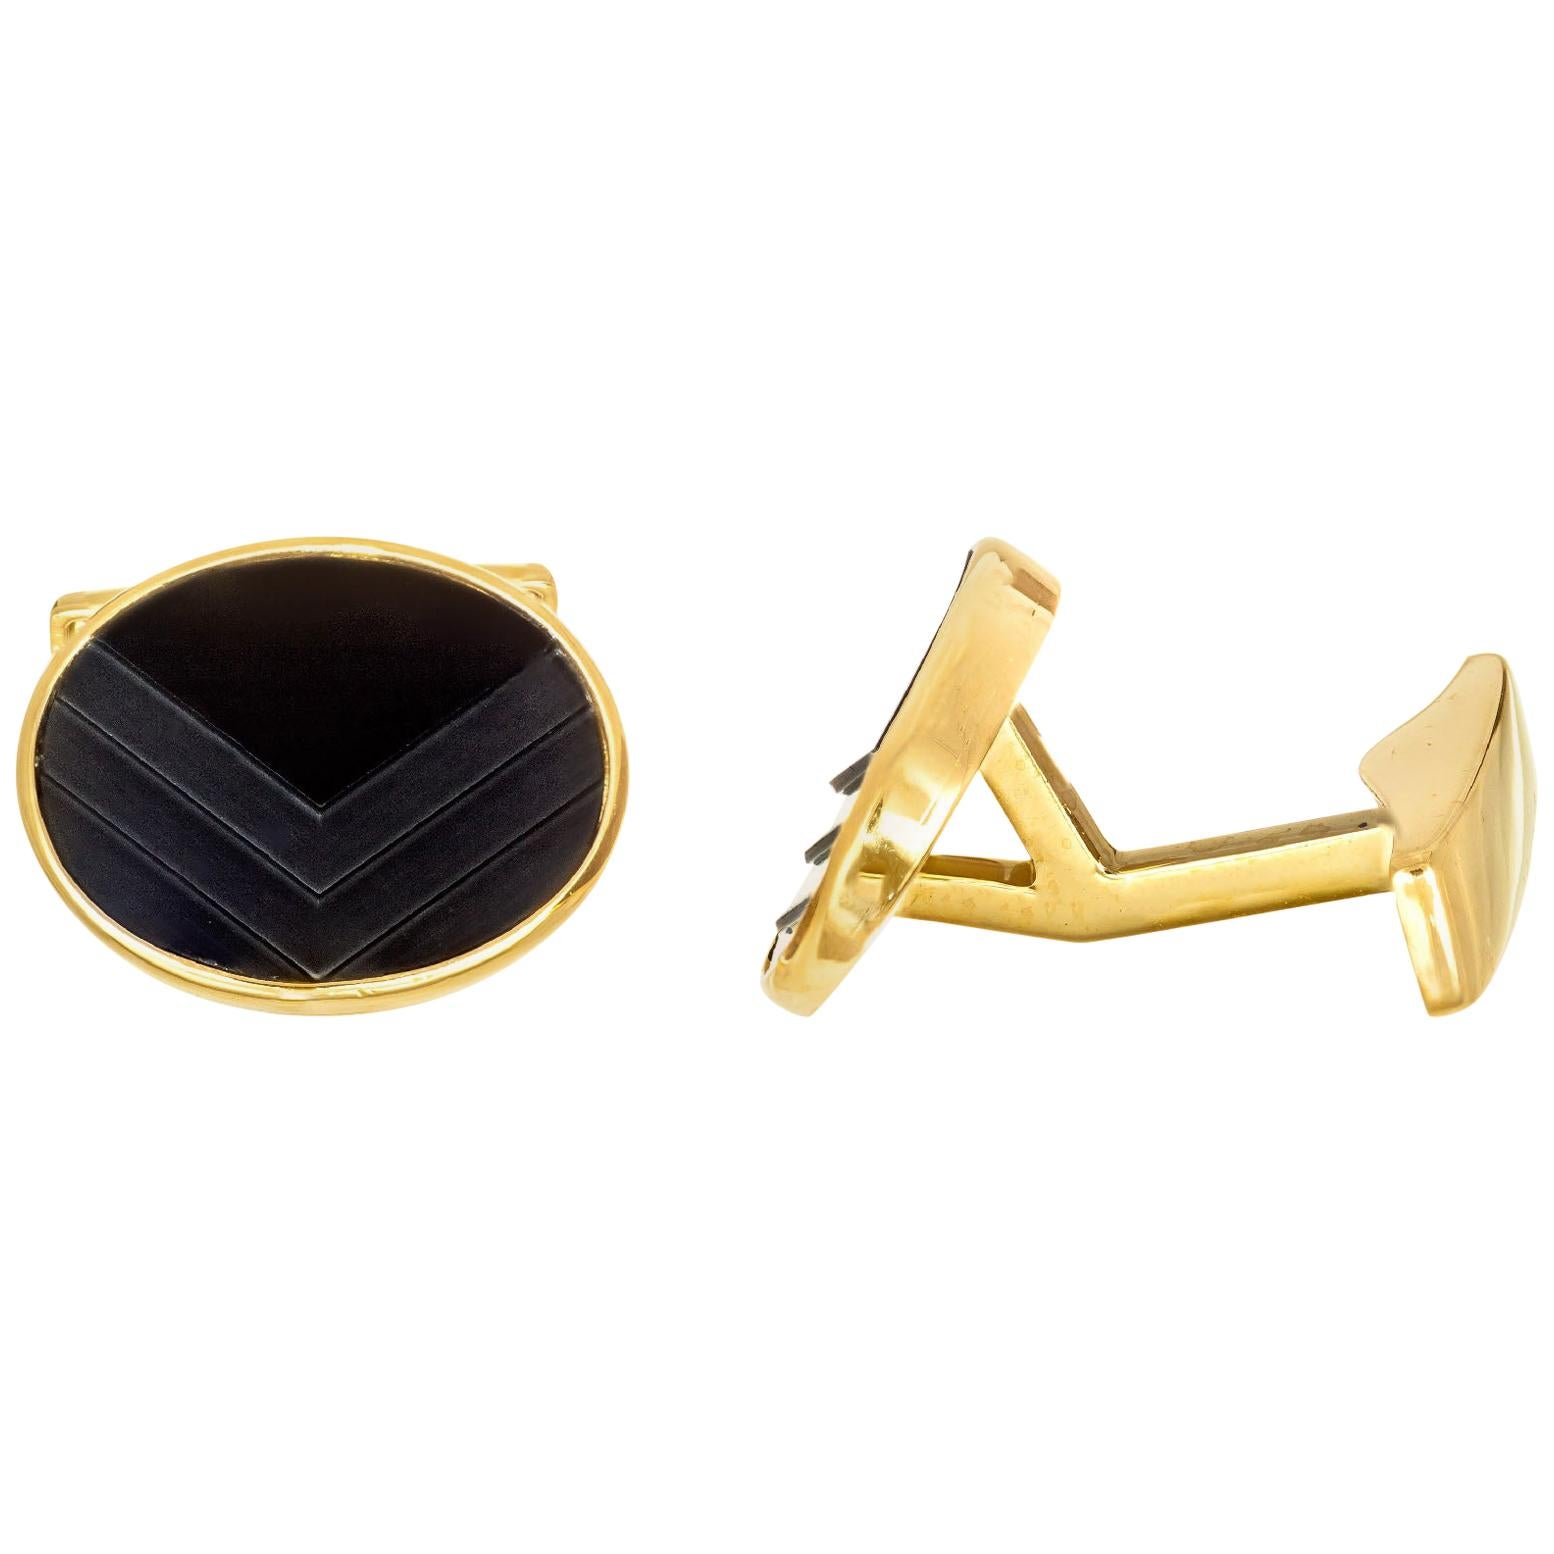 Carved Textured Black Onyx Yellow Gold Cufflinks